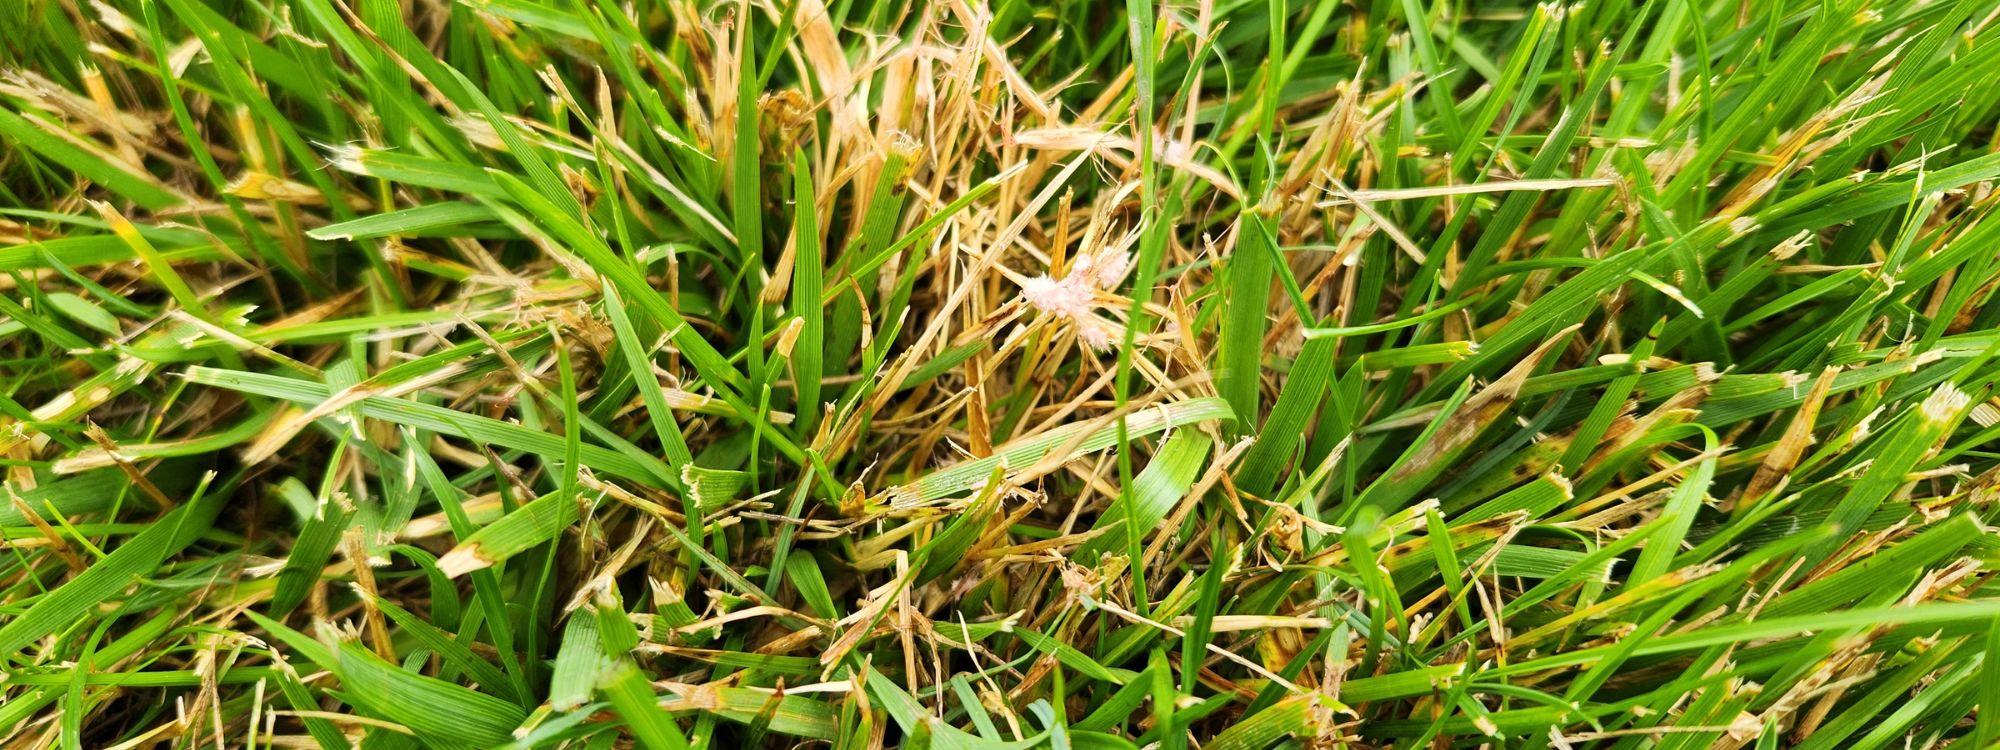 Red Thread in Turf